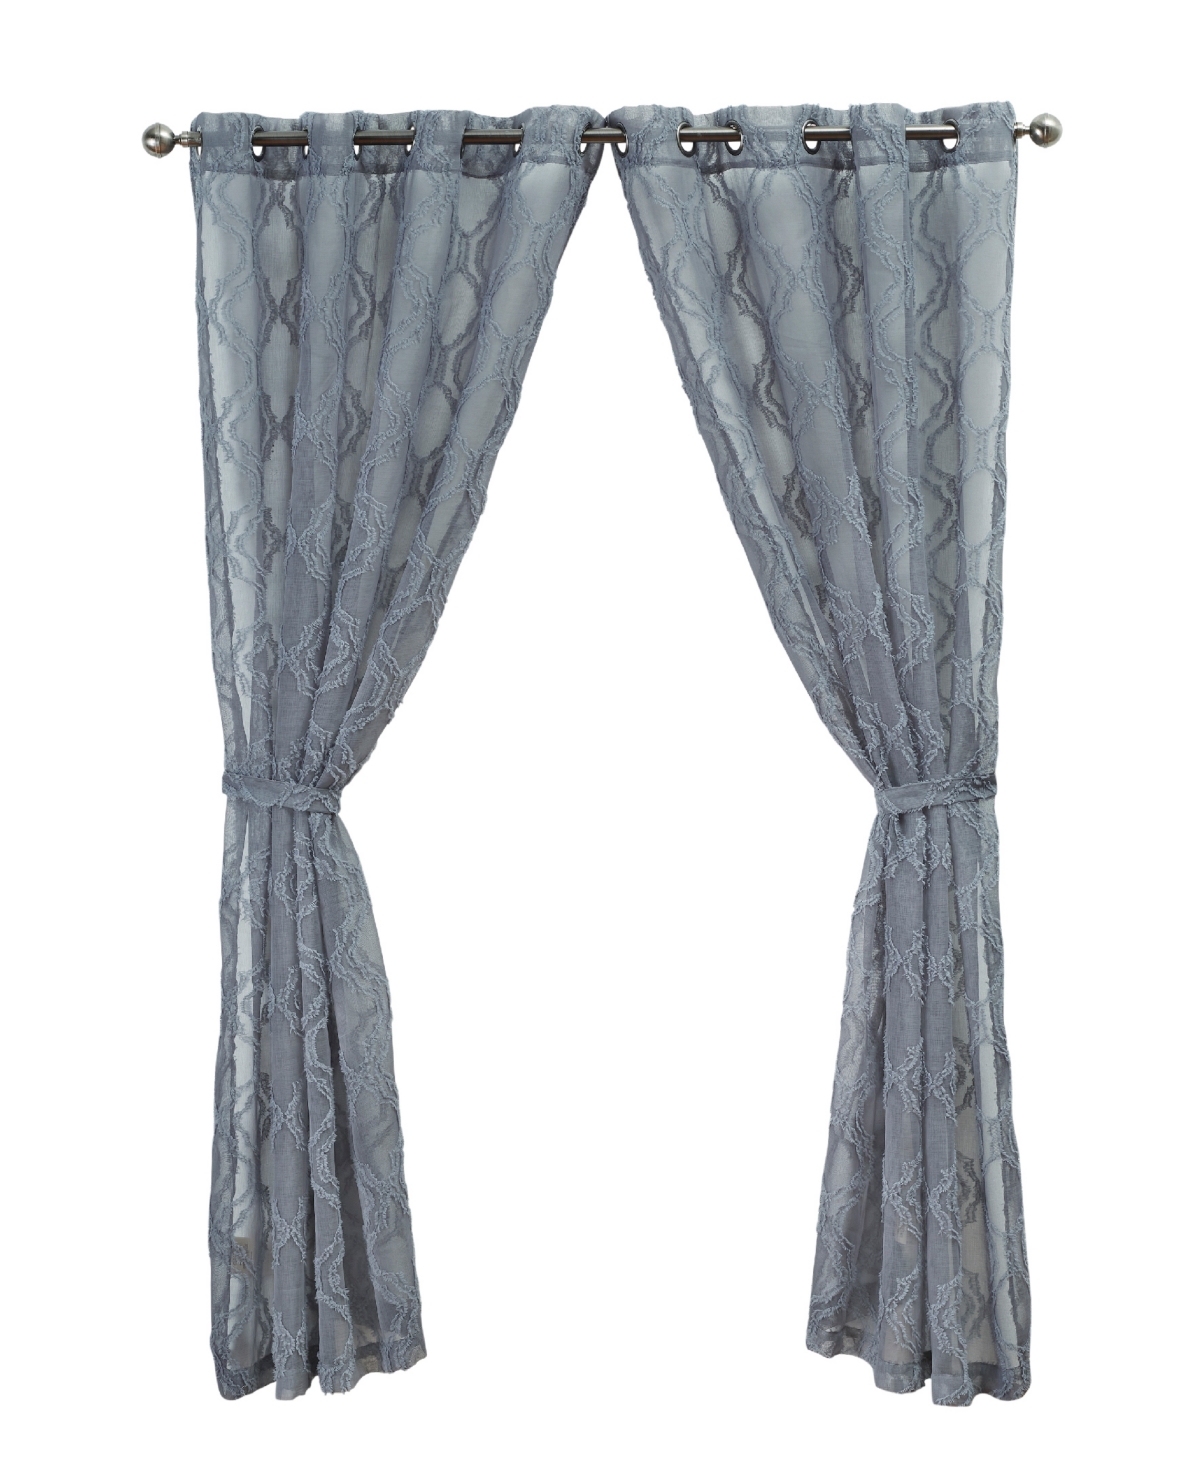 Jessica Simpson Everyn Sheer Embellished Grommet Window Curtain Panel Pair With Tiebacks, 52" X 96" In Charcoal Gray